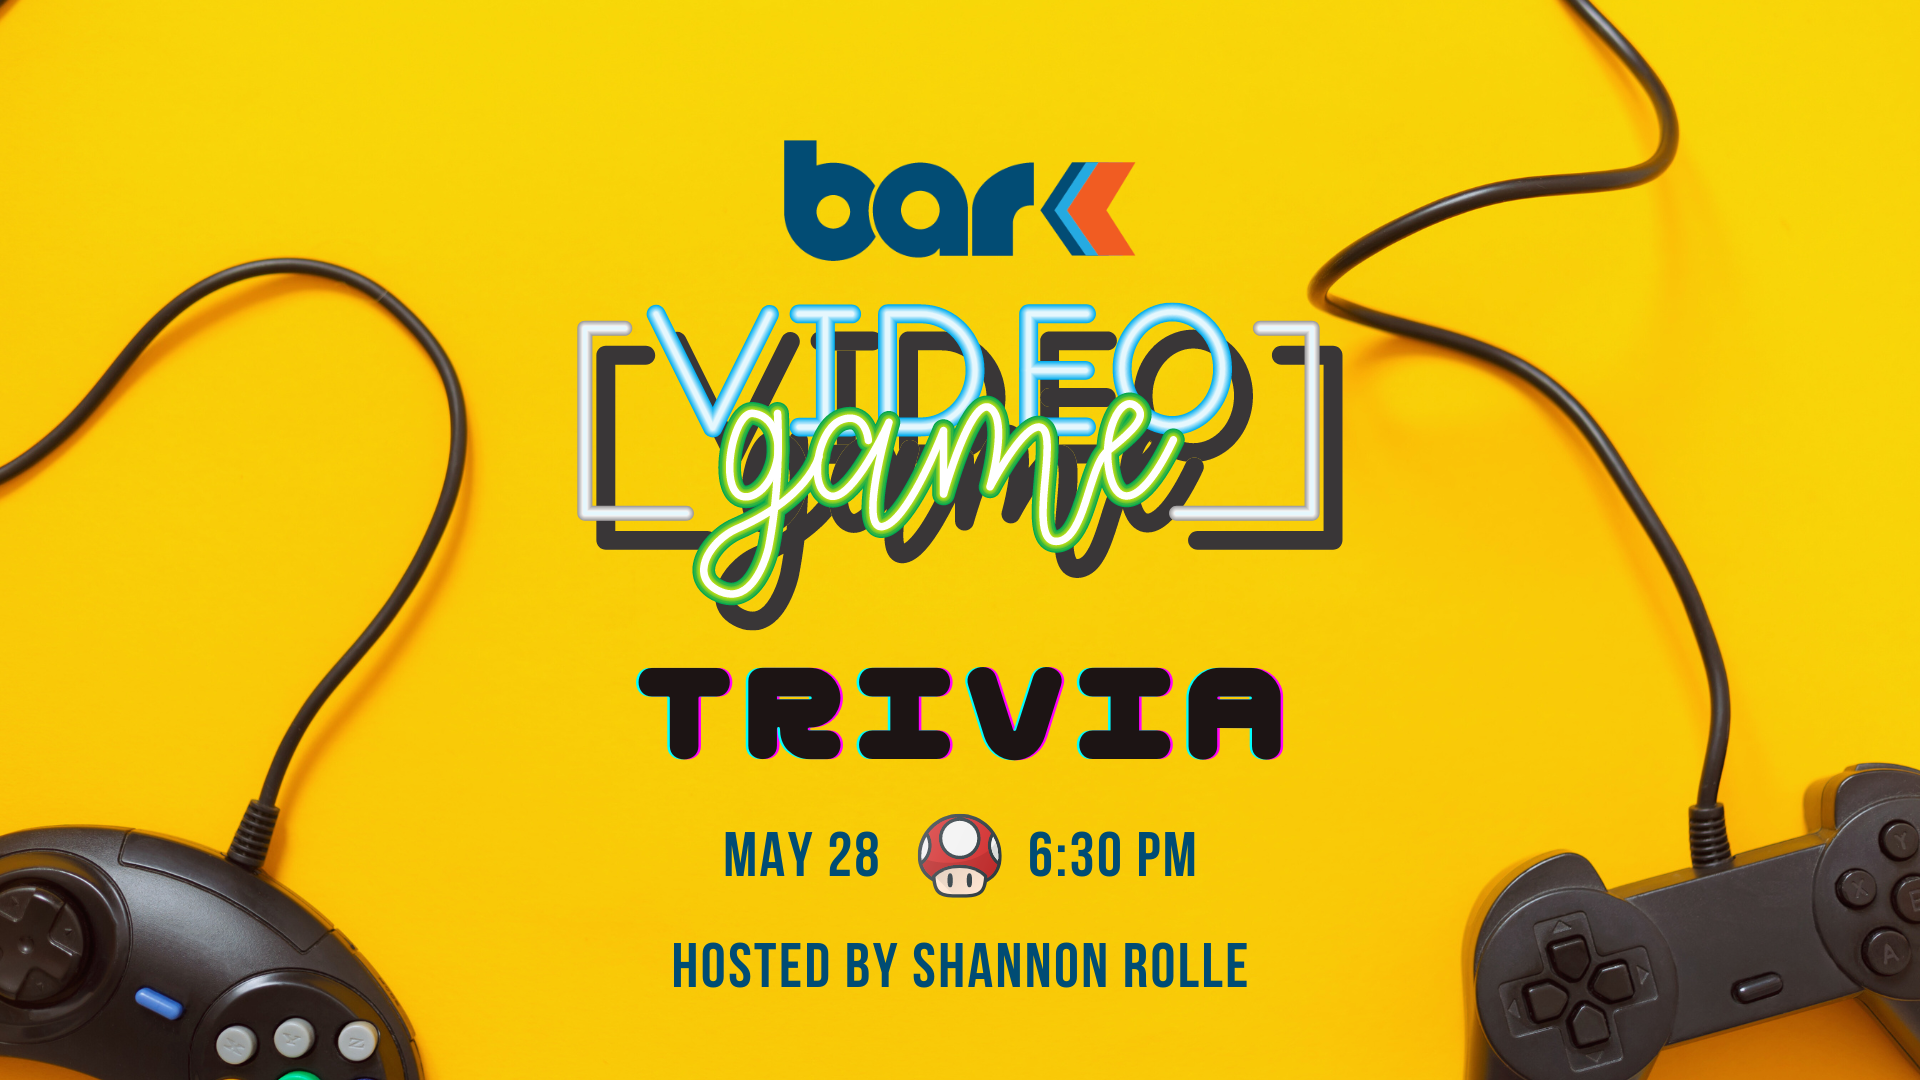 Bark video game trivia may 28th 6:30 pm hosted by shannon rolle